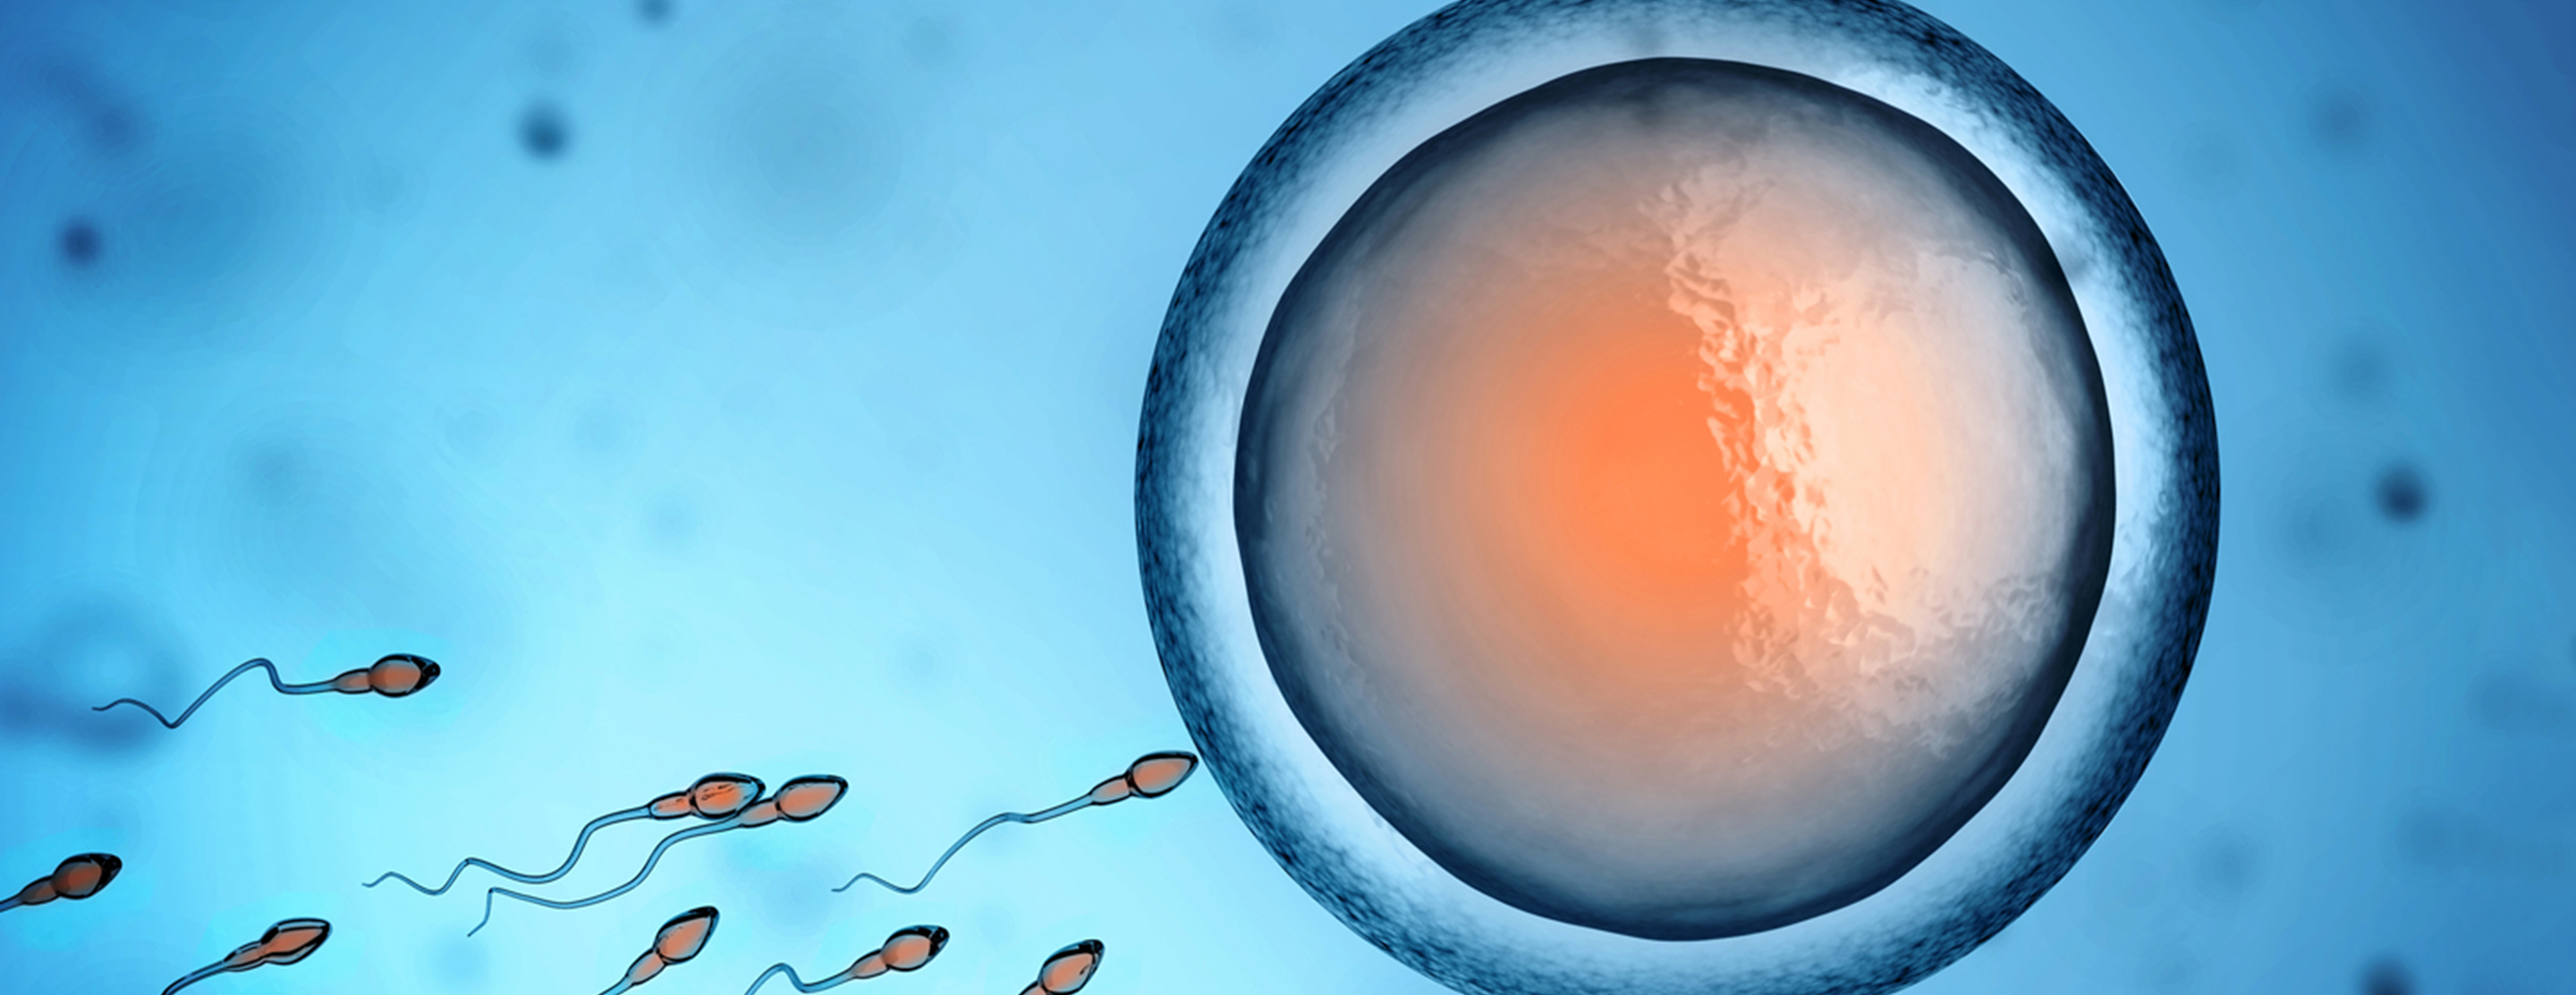 Conception: How It Works | Patient Education | UCSF Health